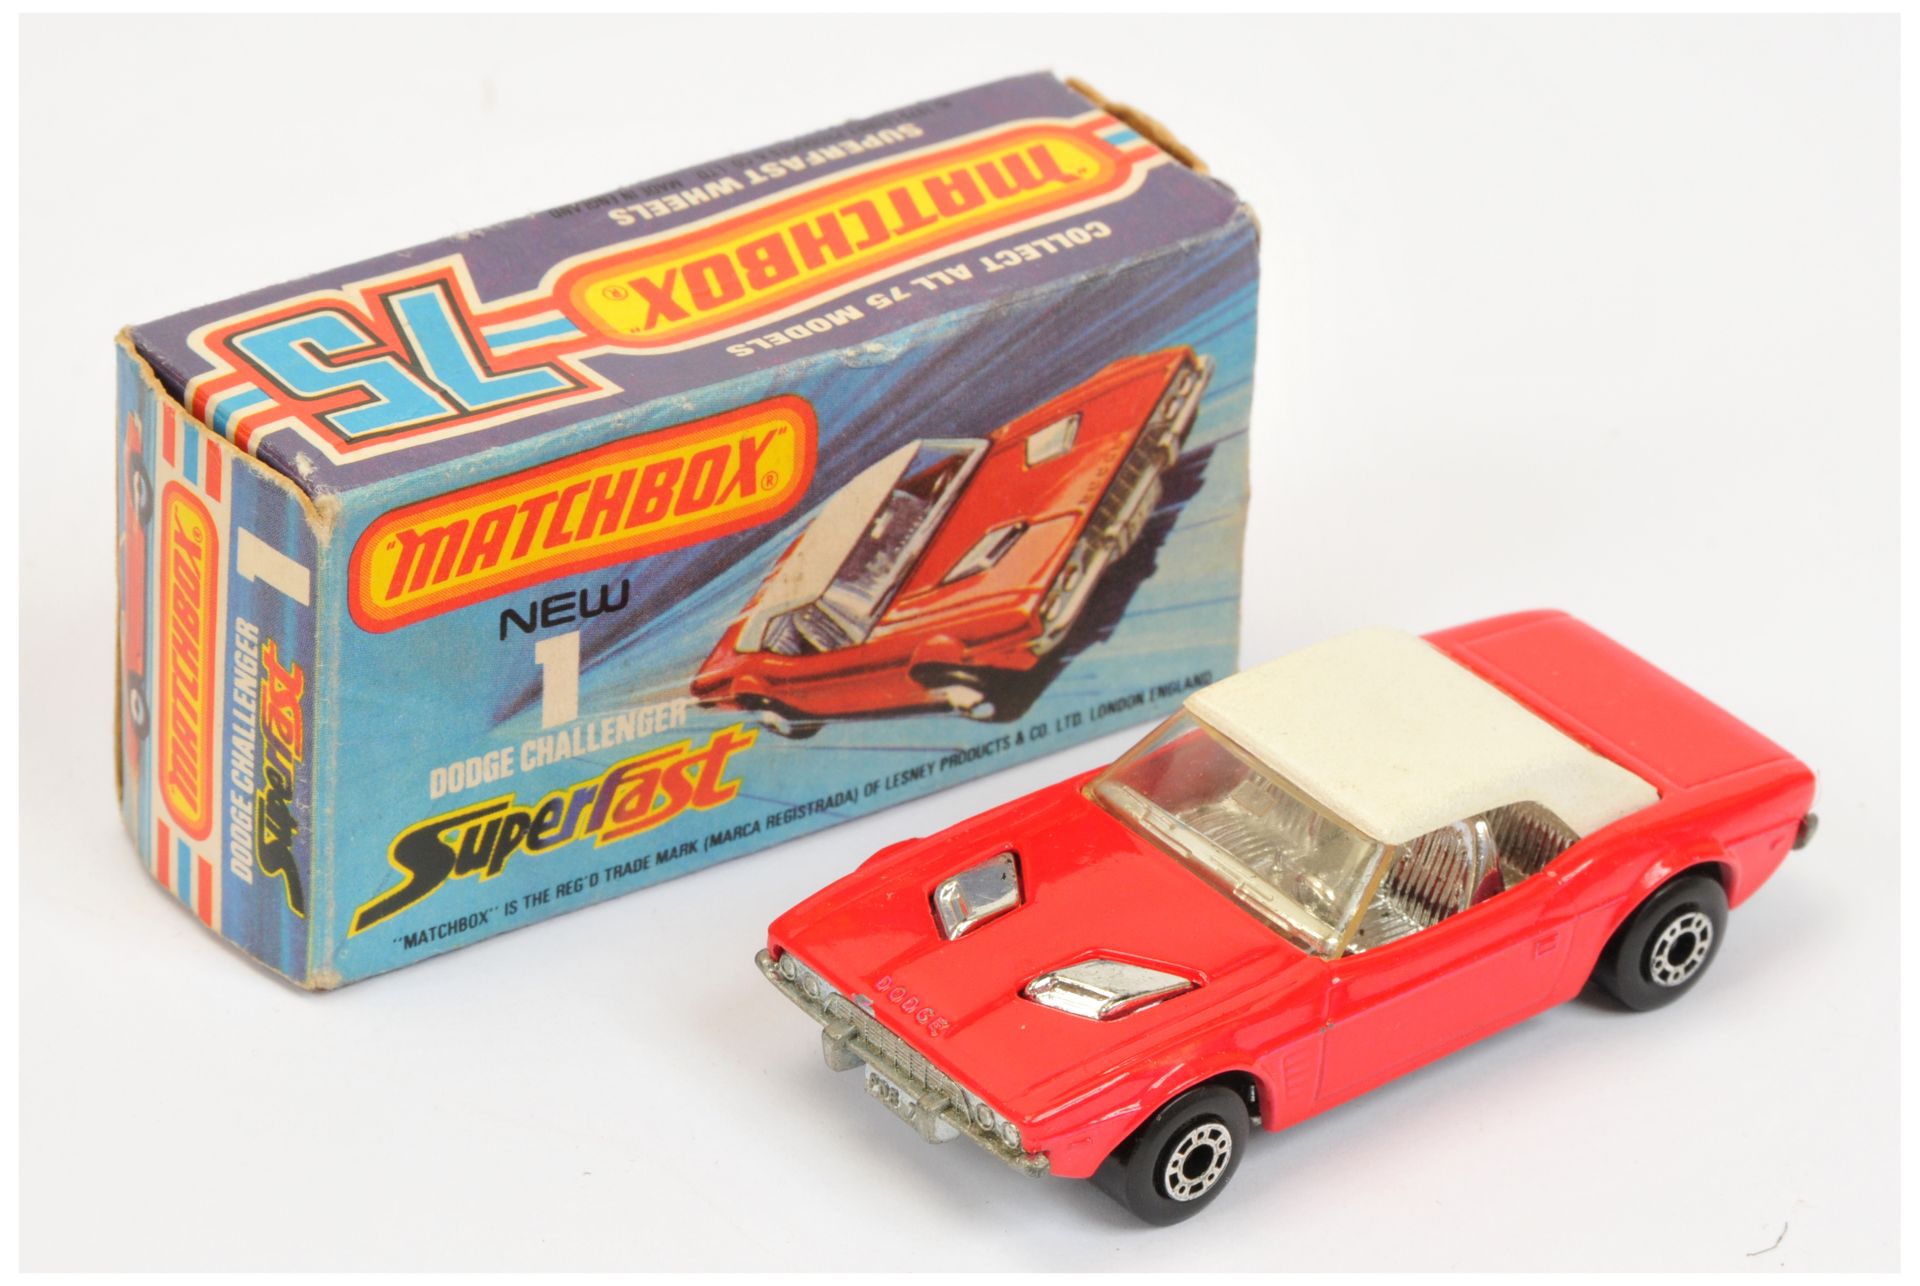 Matchbox Superfast Alpine Track Set 900 - appears to be complete with most components, including ... - Image 3 of 3